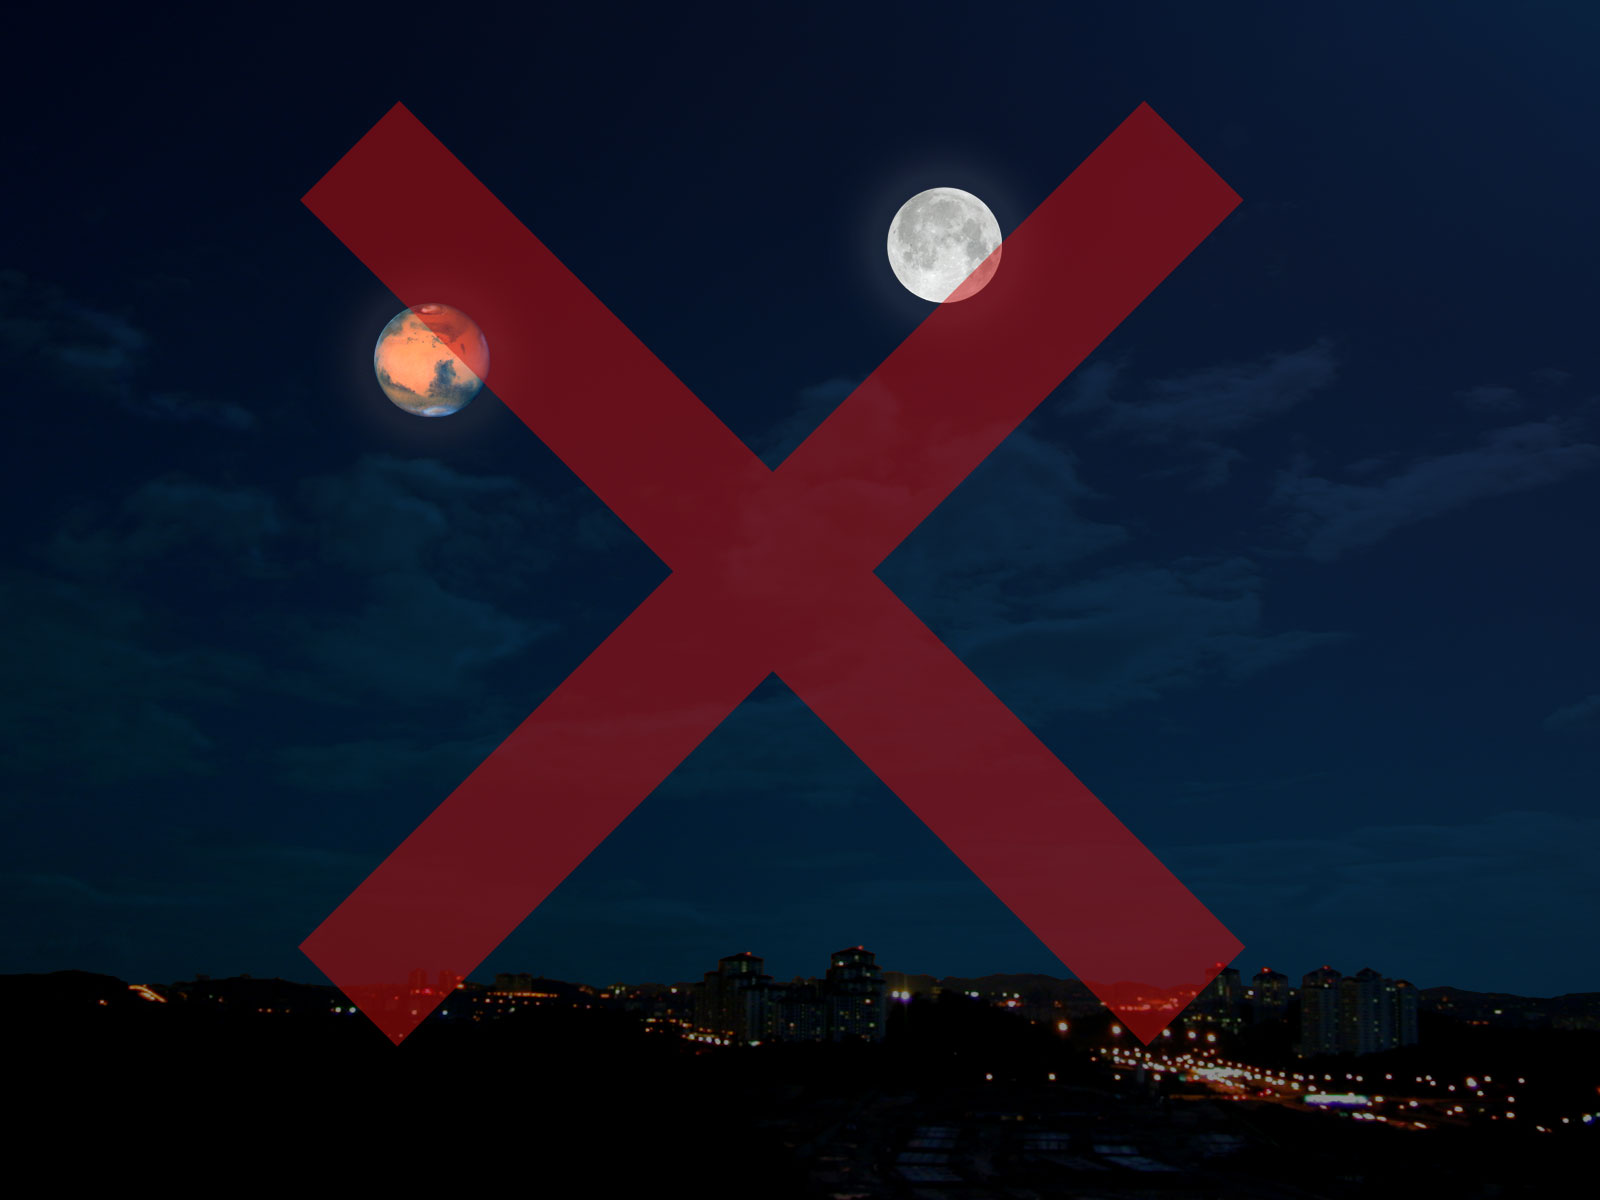 Don't be fooled by the Mars Hoax. The message is that Mars will look as big as the Moon in our night sky. If that were true, we'd be in big trouble given the gravitational pulls on Earth, Mars, and our Moon!